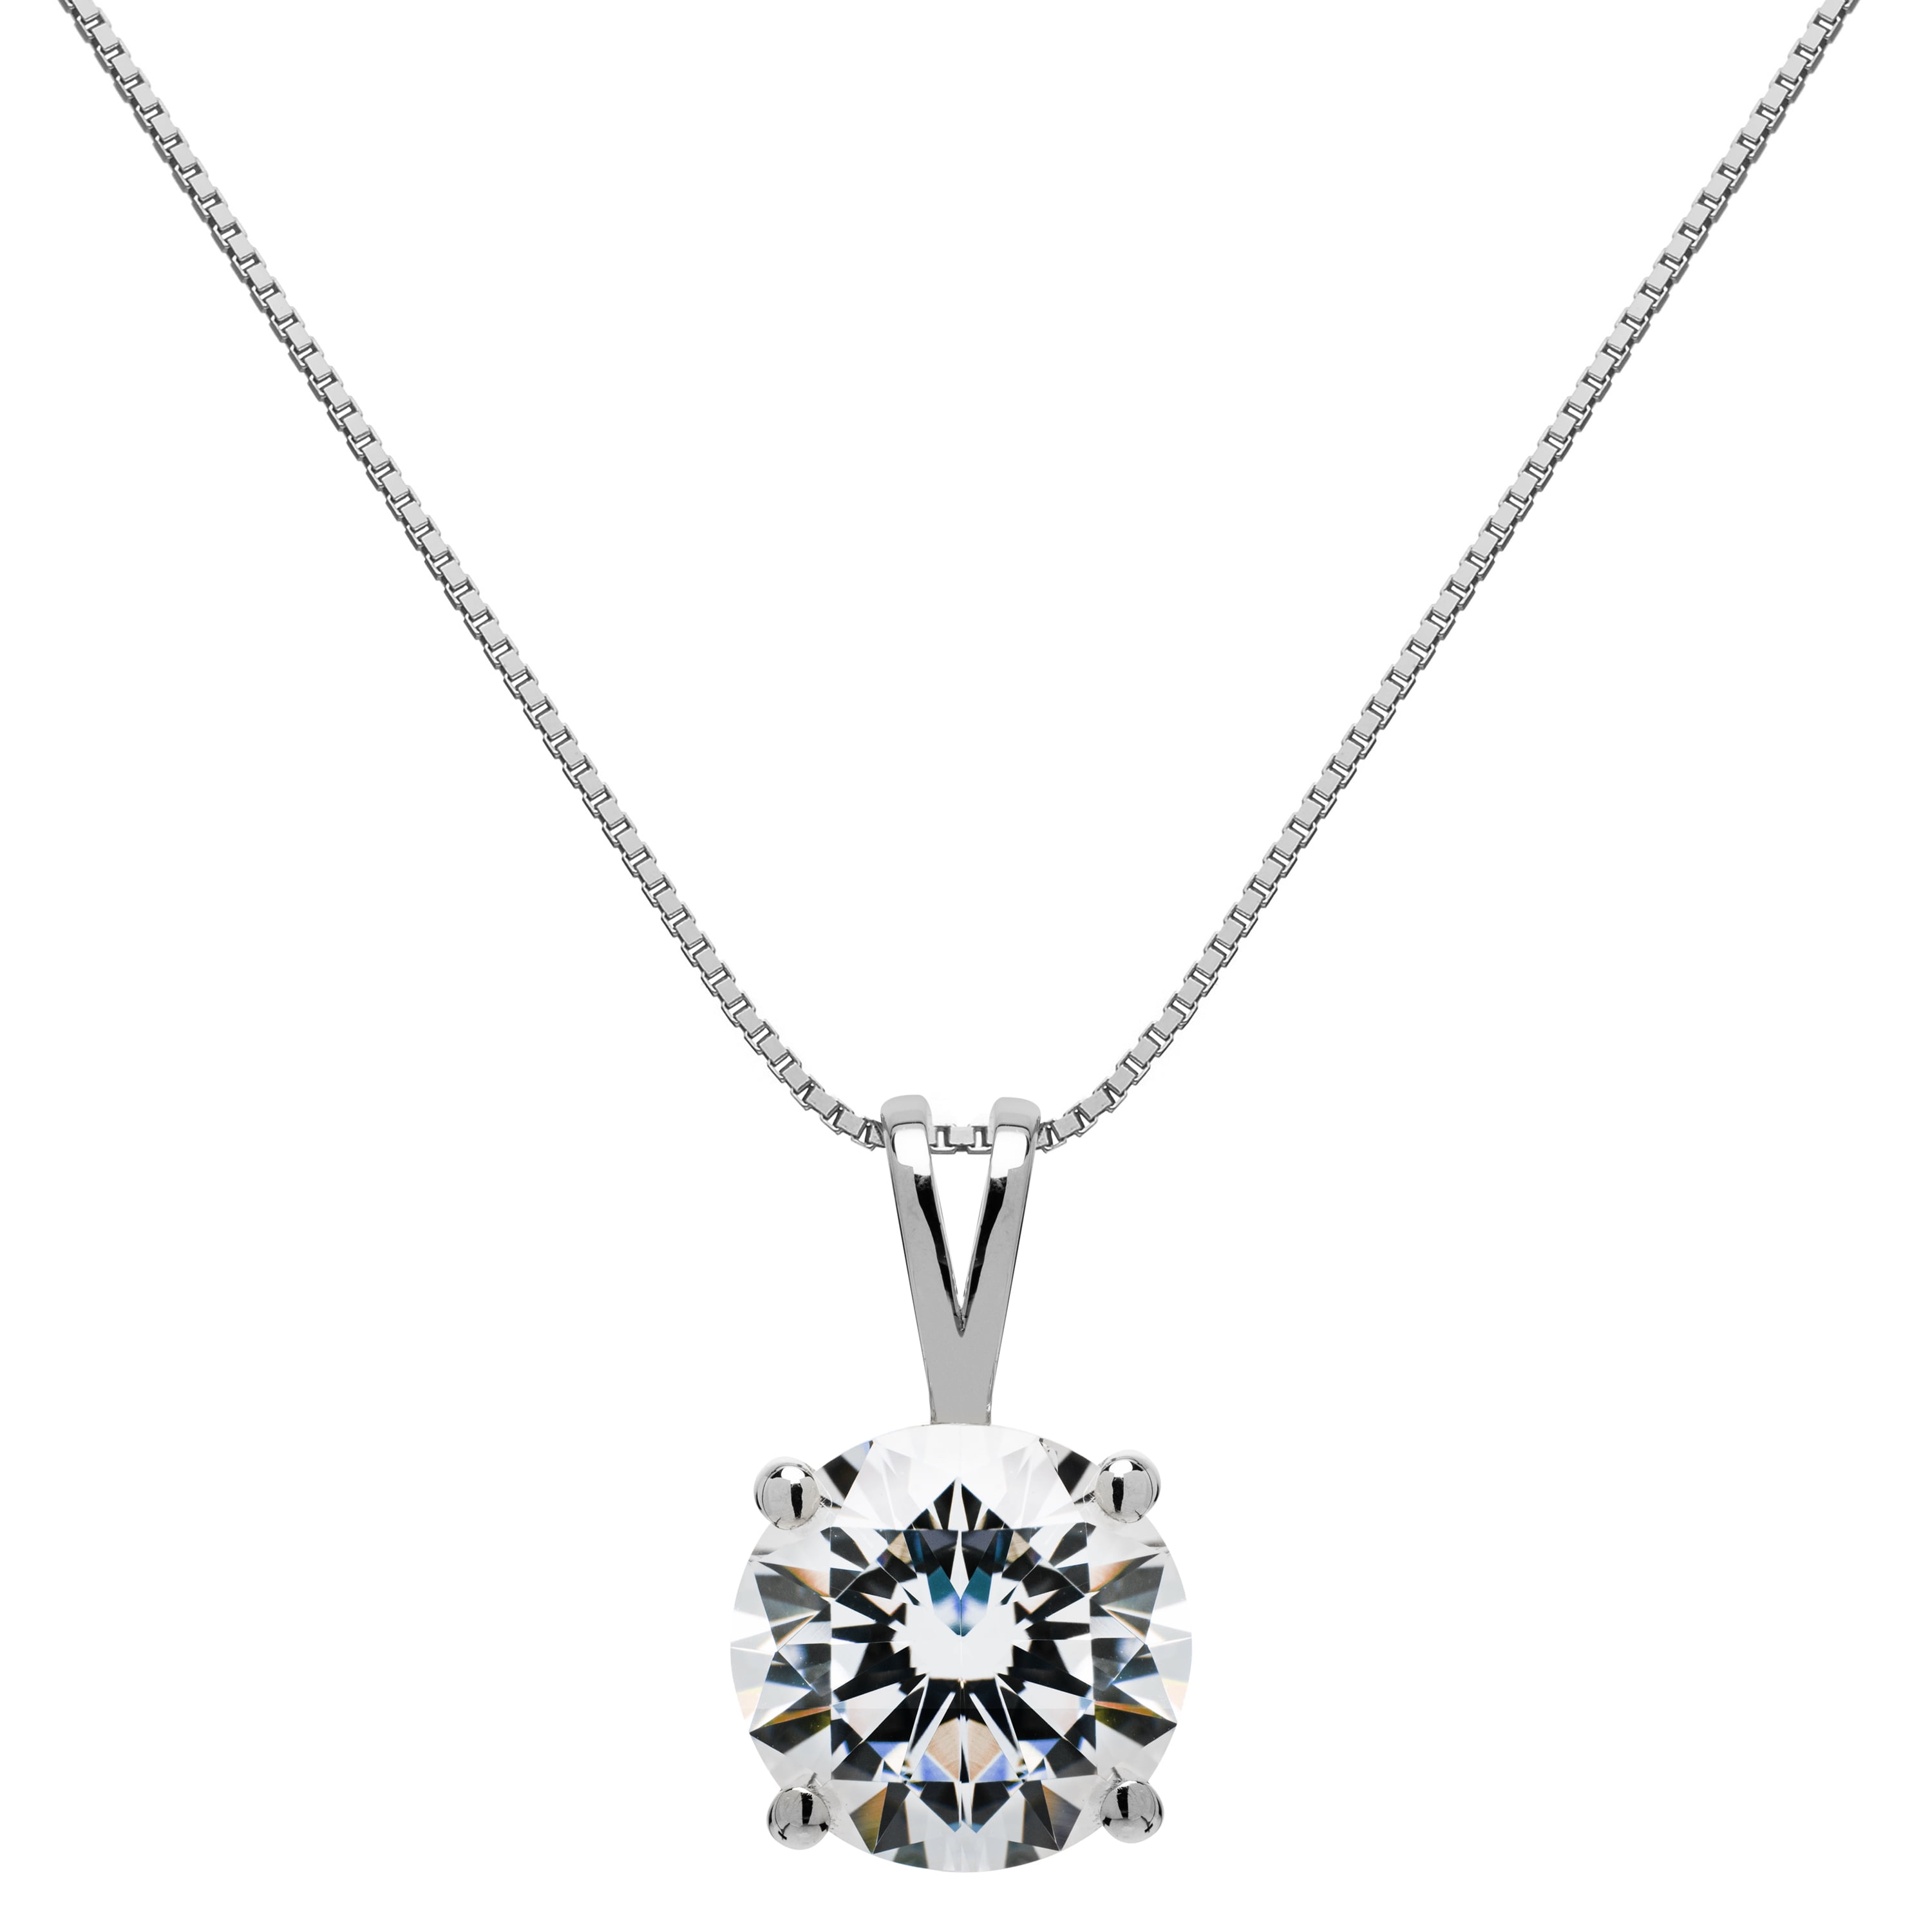 Everyday Elegance - 14K Solid White Gold Pendant Necklace | Round Cut